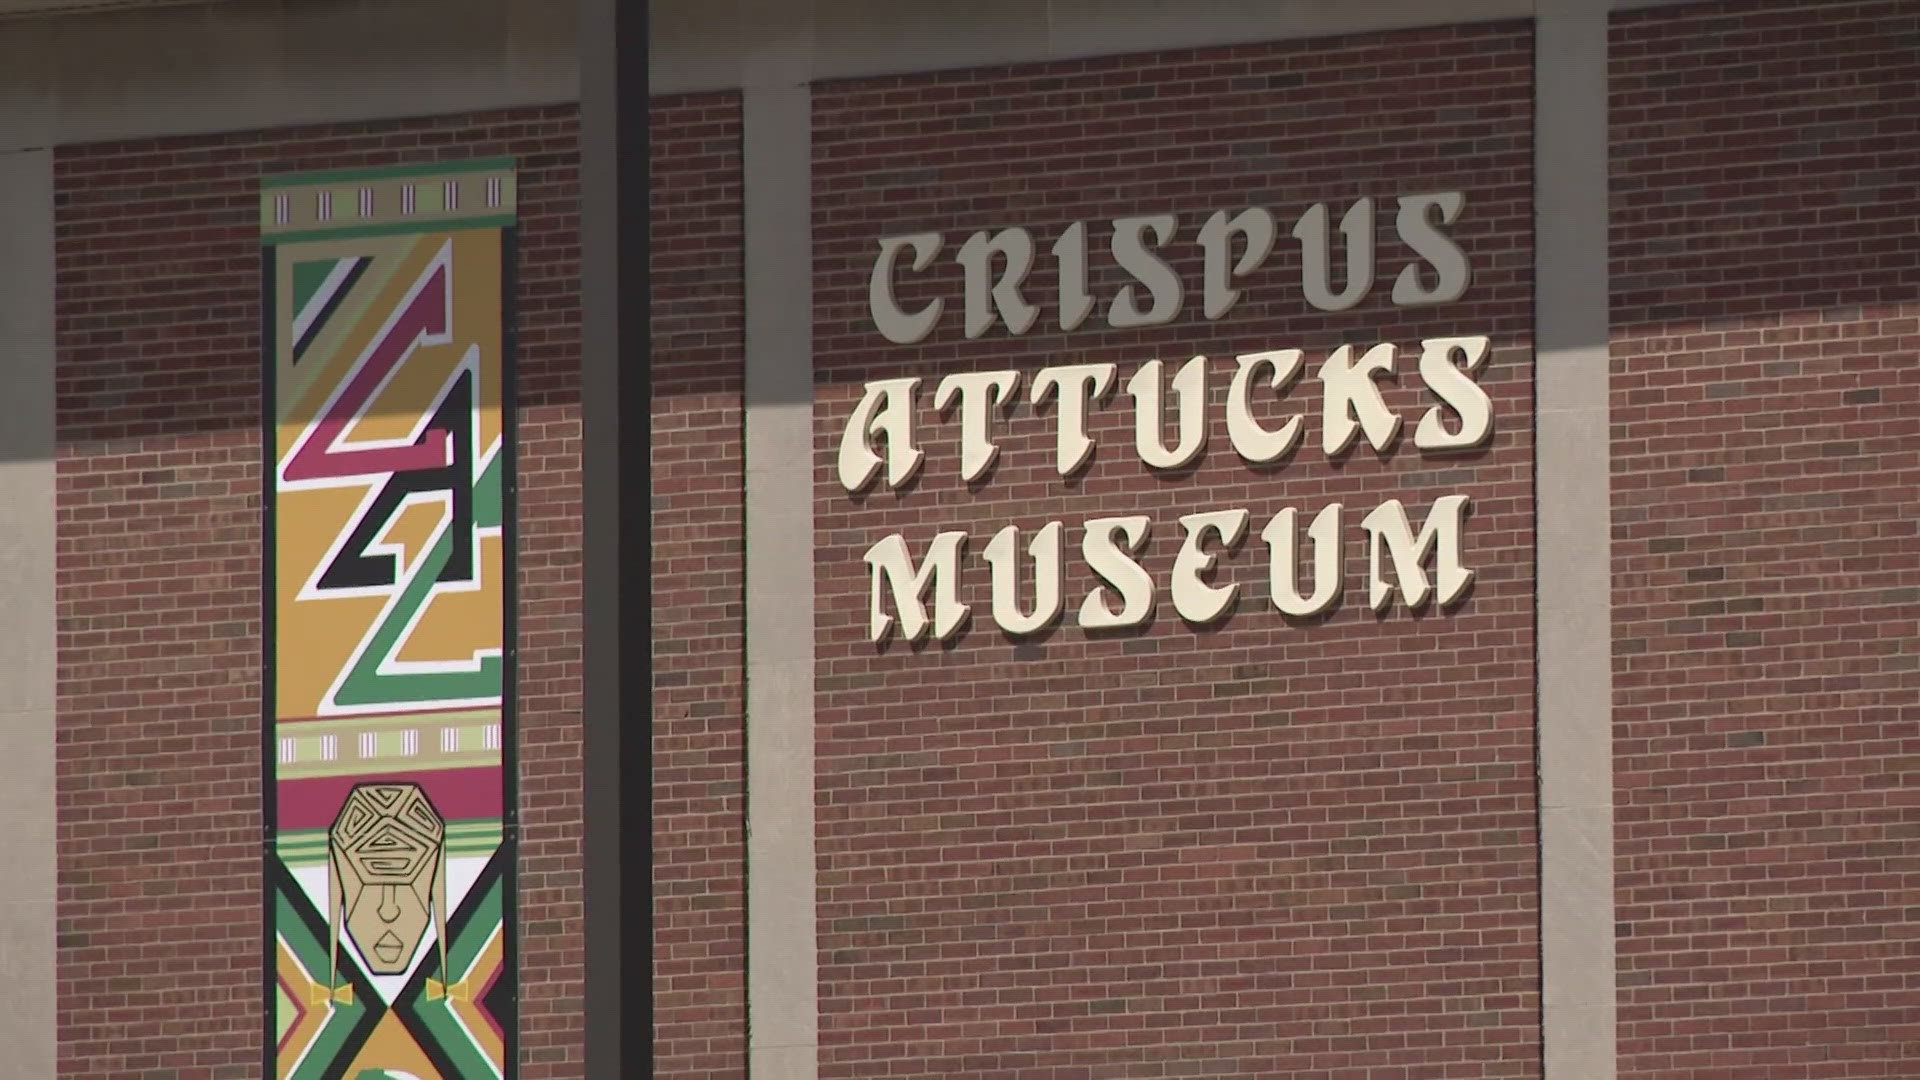 13News reporter Emily Longnecker breaks down new court documents that show a mother and two woman walked into Crispus Attucks to assault a student.